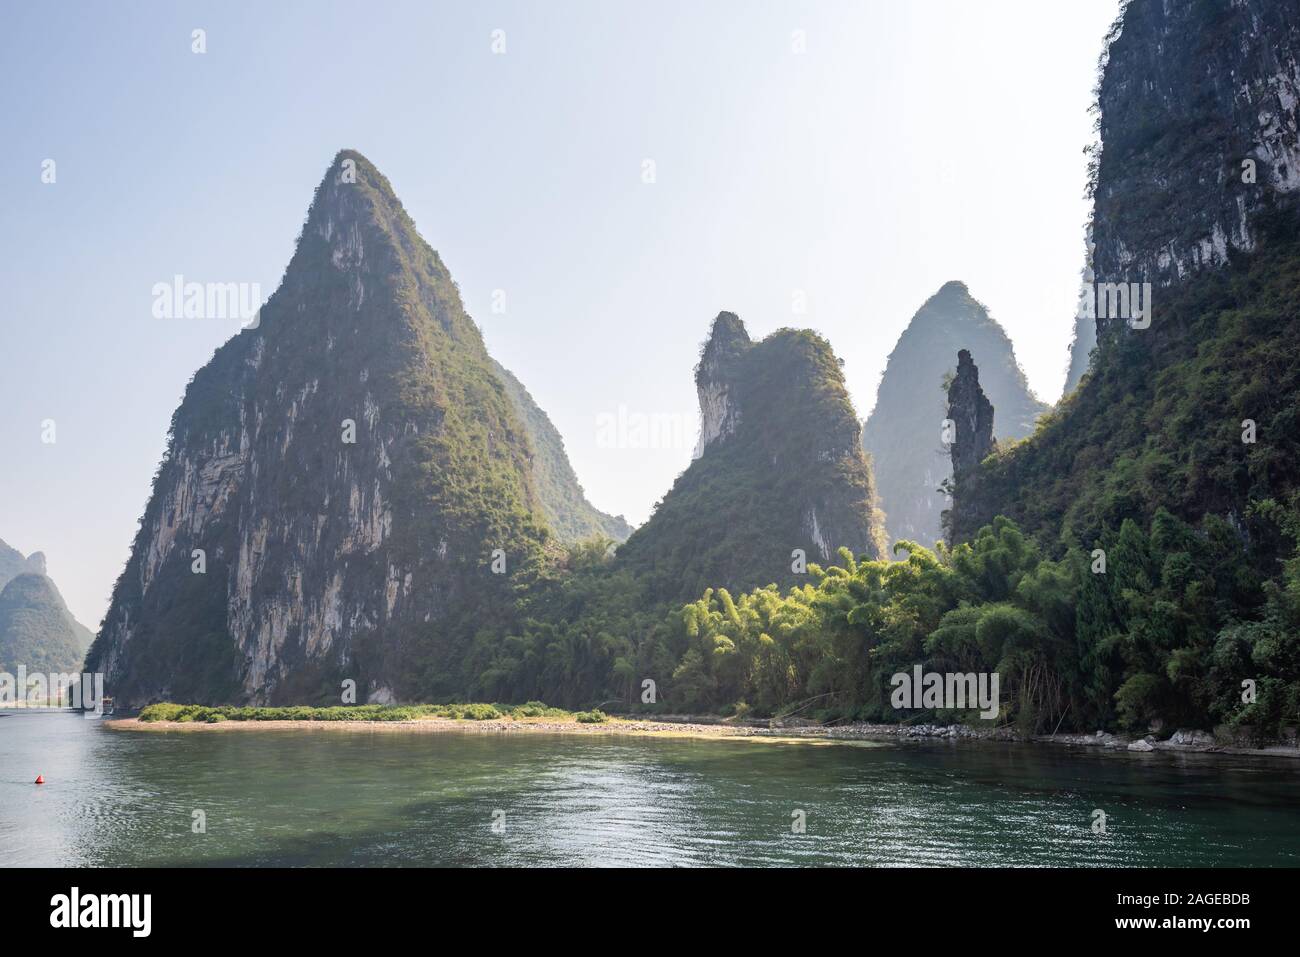 Boat on Li river cruise and karst formation mountain landscape in the fog between Guiling and Yangshuo, Guangxi province, China Stock Photo